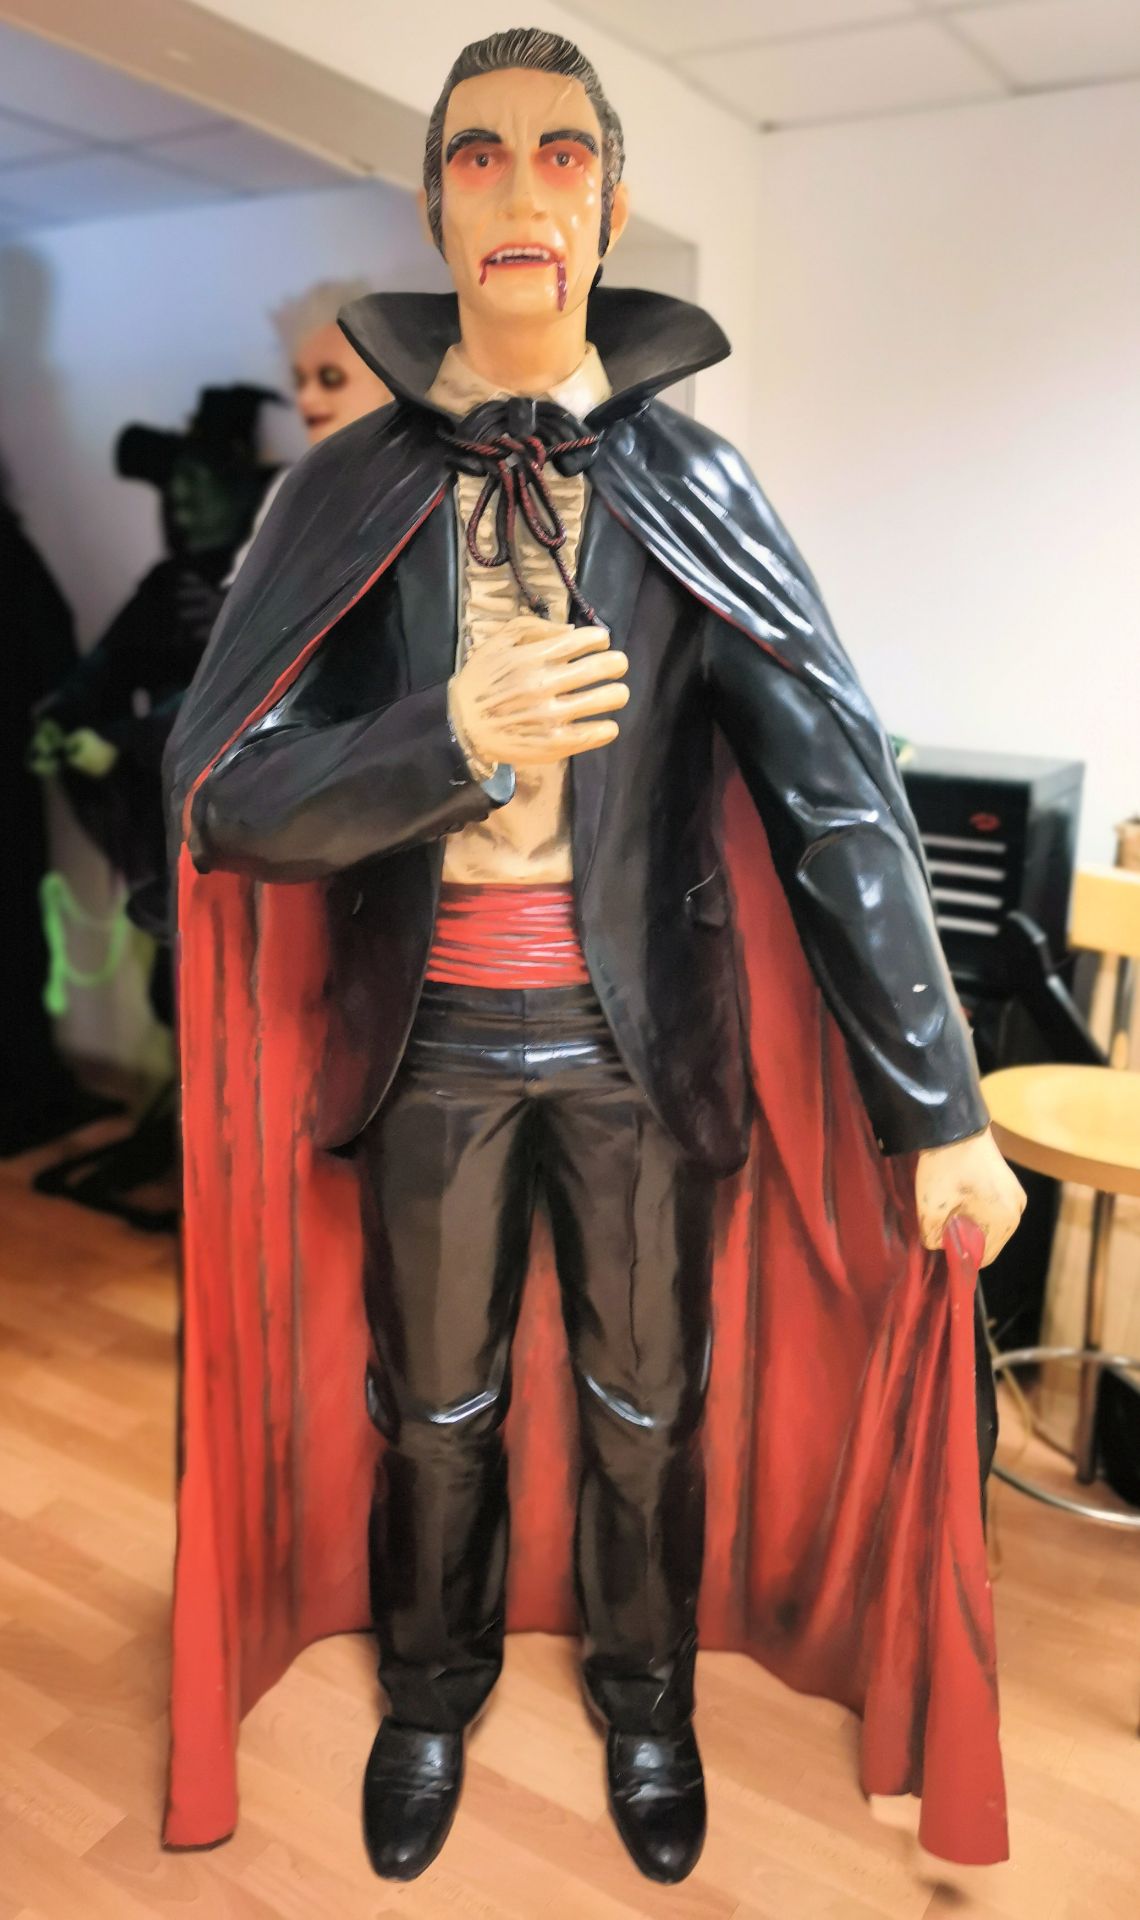 1 x Limited Edition Life Size Resin Dracula made by AAA - Dimensions: 1880 x 900 mm - CL355 - Locati